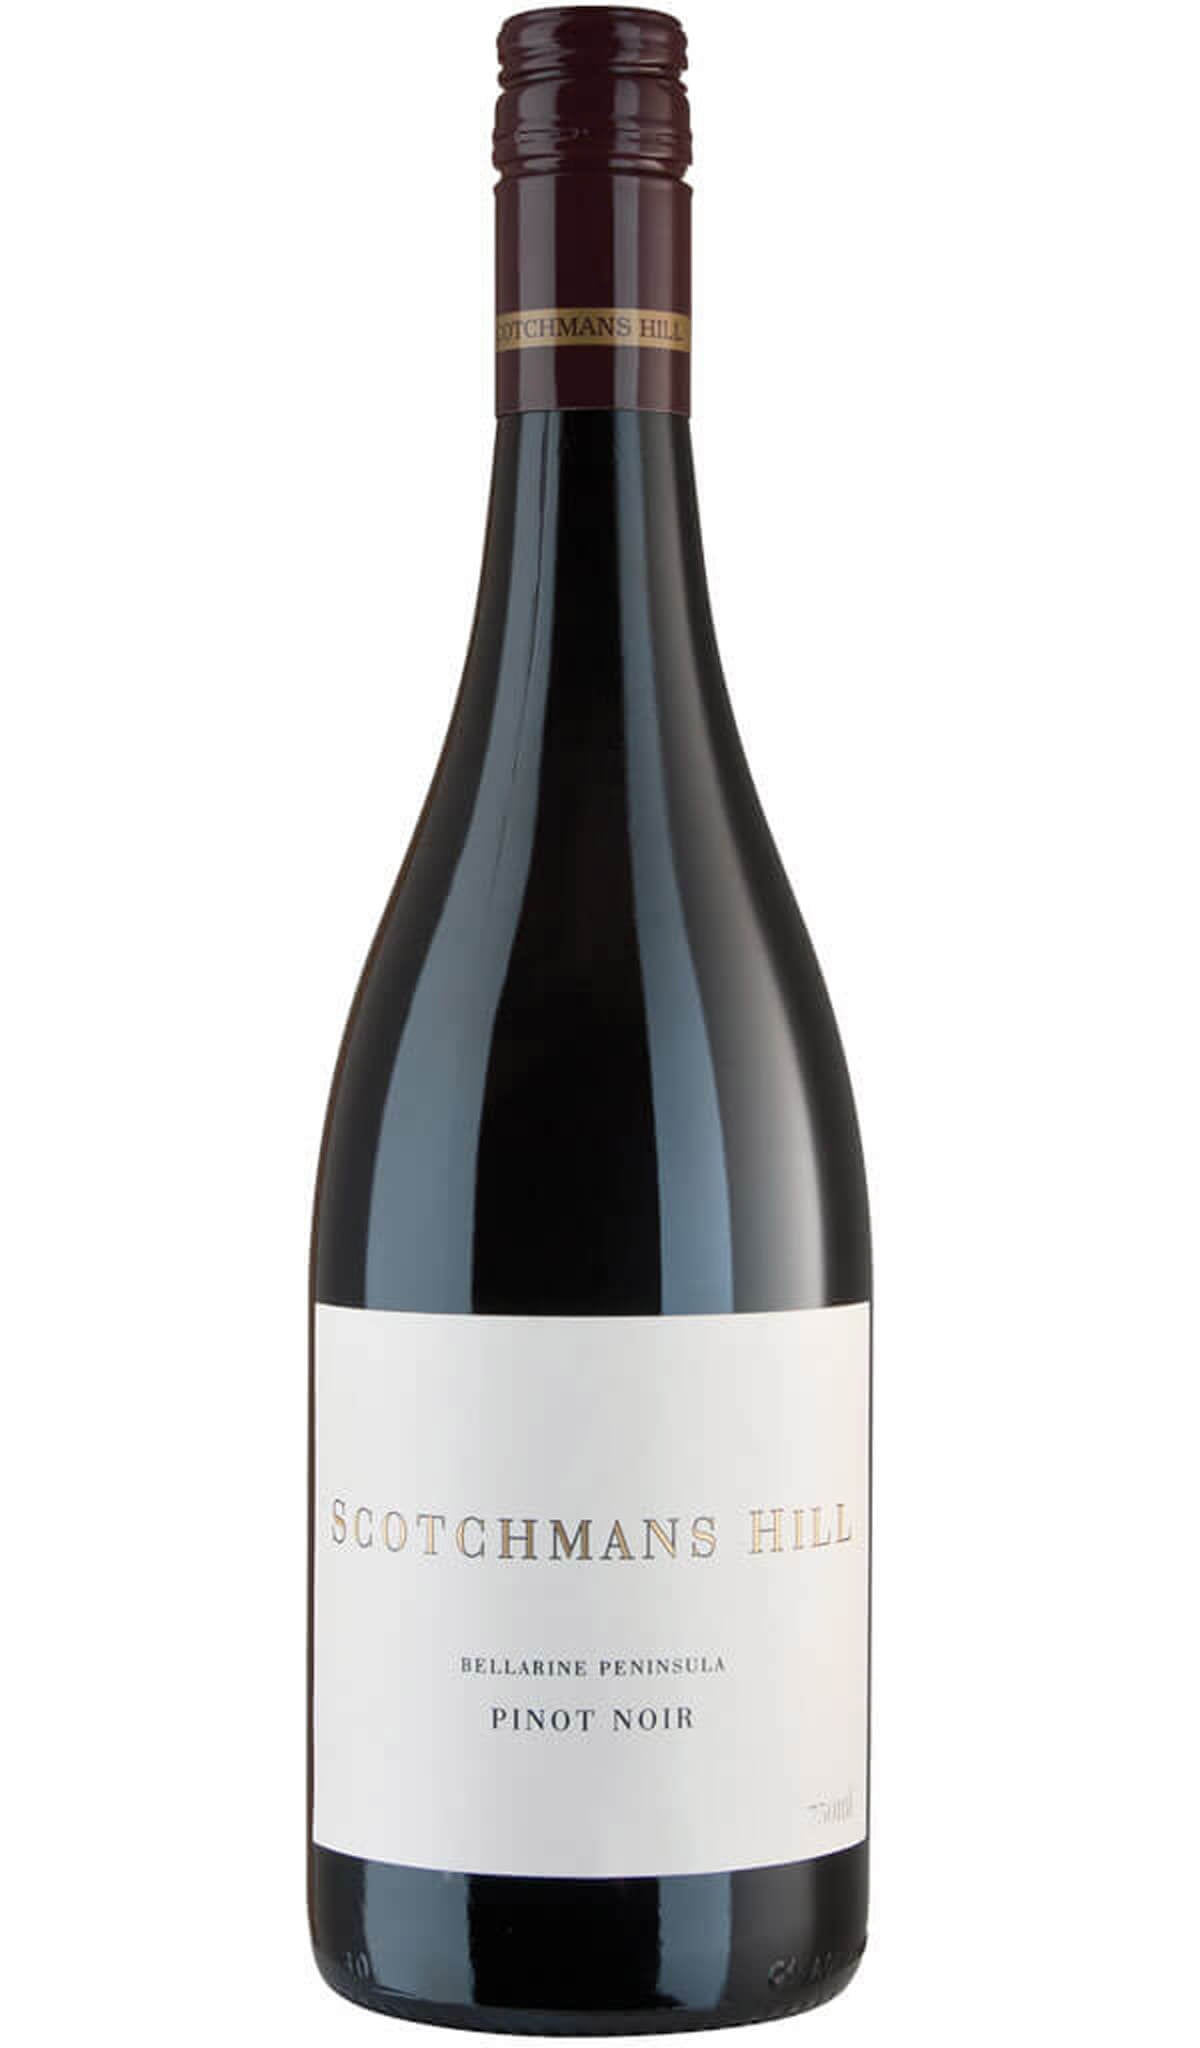 Find out more or buy Scotchmans Hill Pinot Noir 2022 (Bellarine Peninsula) online at Wine Sellers Direct - Australia’s independent liquor specialists.